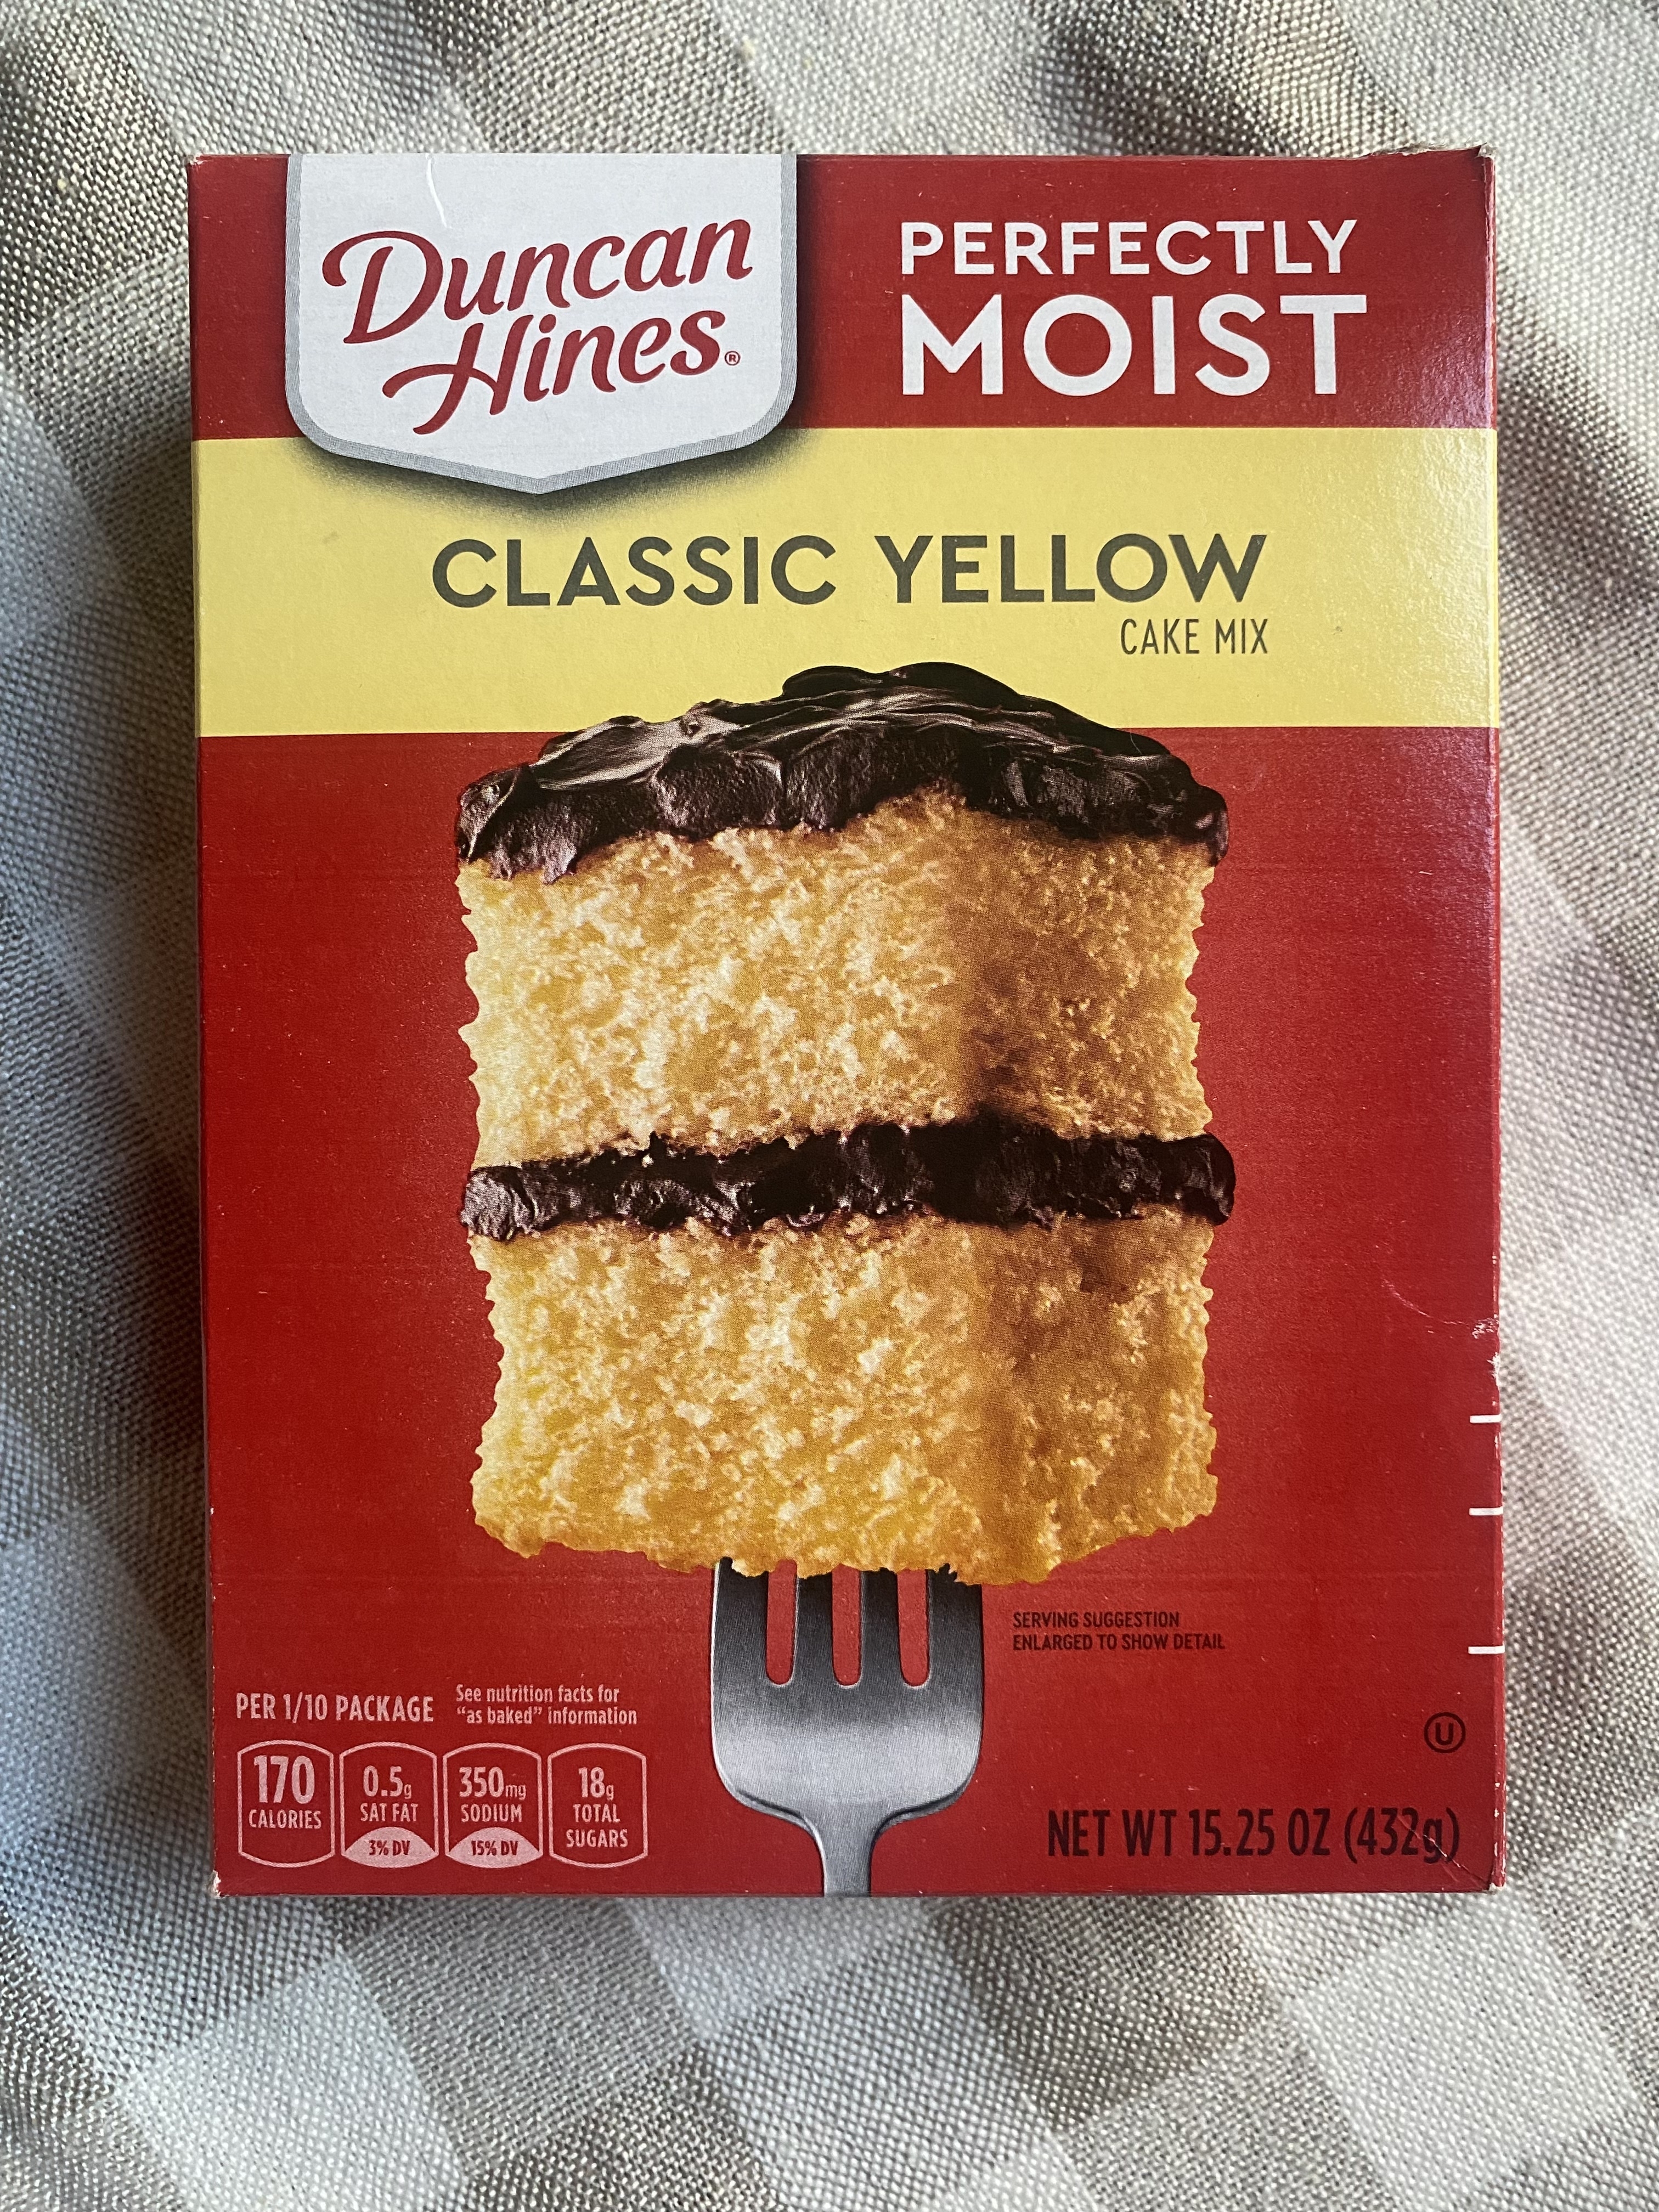 a box of duncan hines cake mix